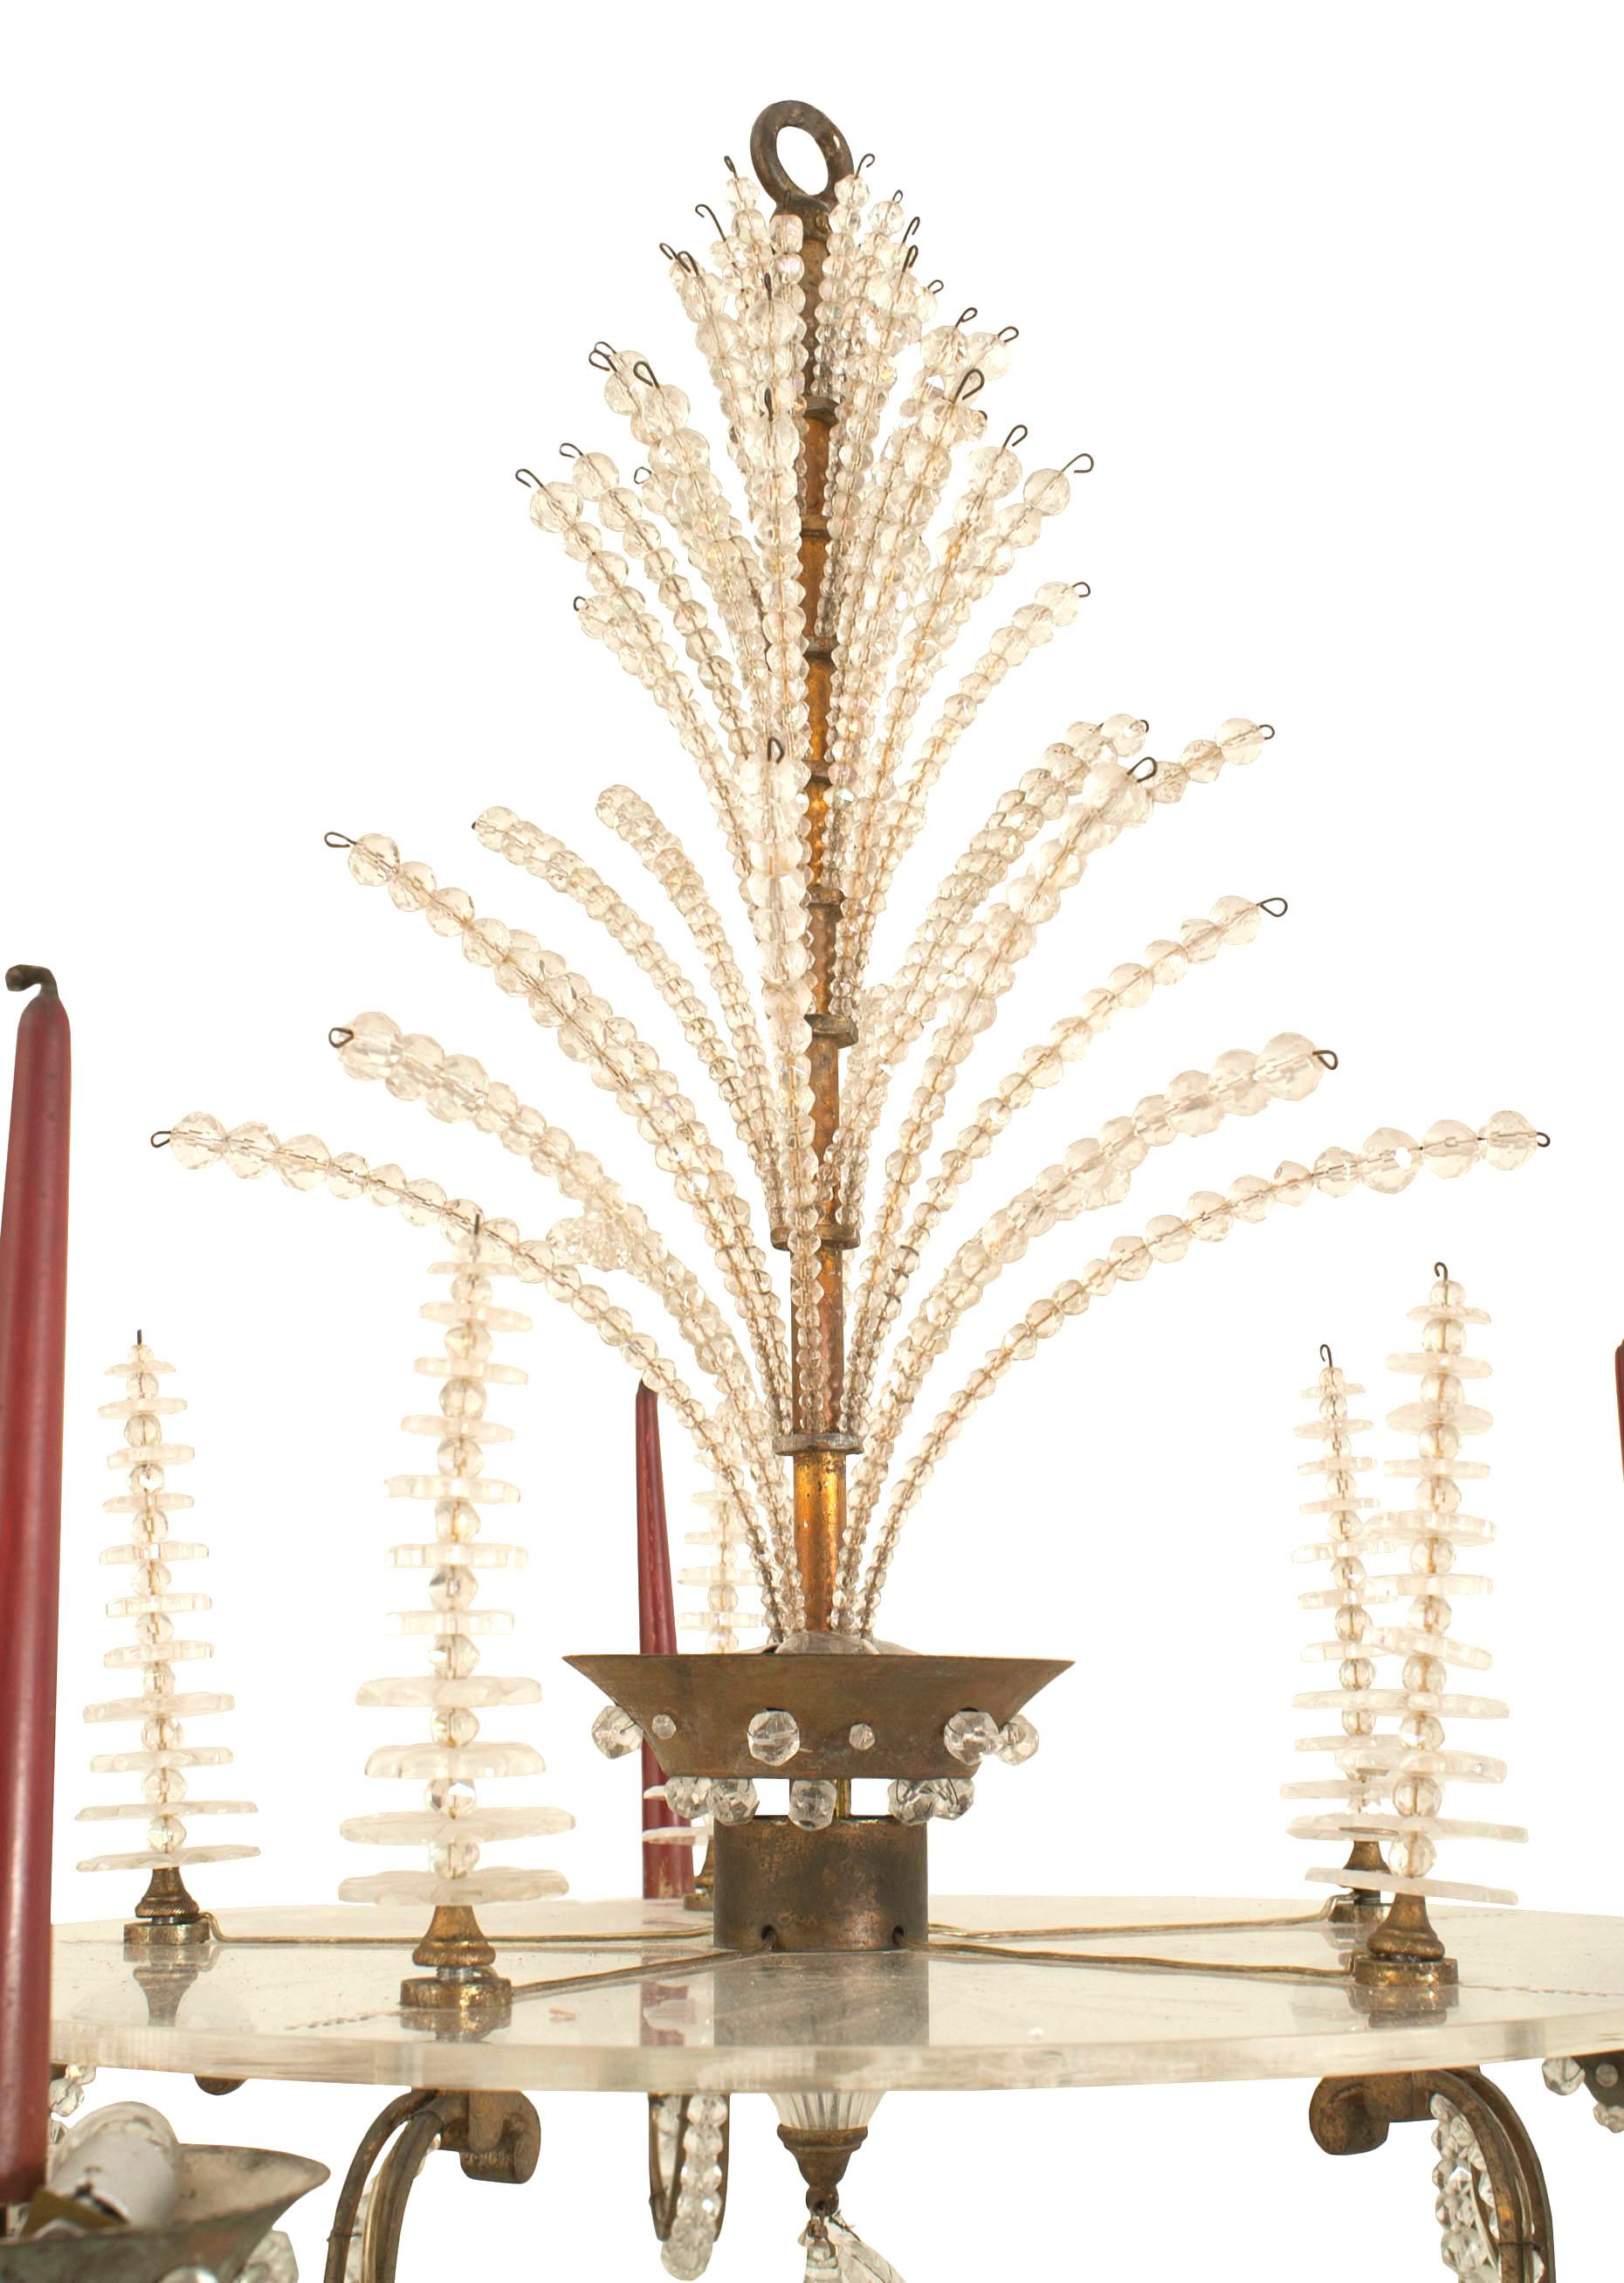 French 1940s oxidize bronze chandelier with 5 scroll arms trimmed with glass beads emanating from a Lucite ribbon and wheat design disc holding tiered finals & a beaded spray. (Attributed to Baguès).